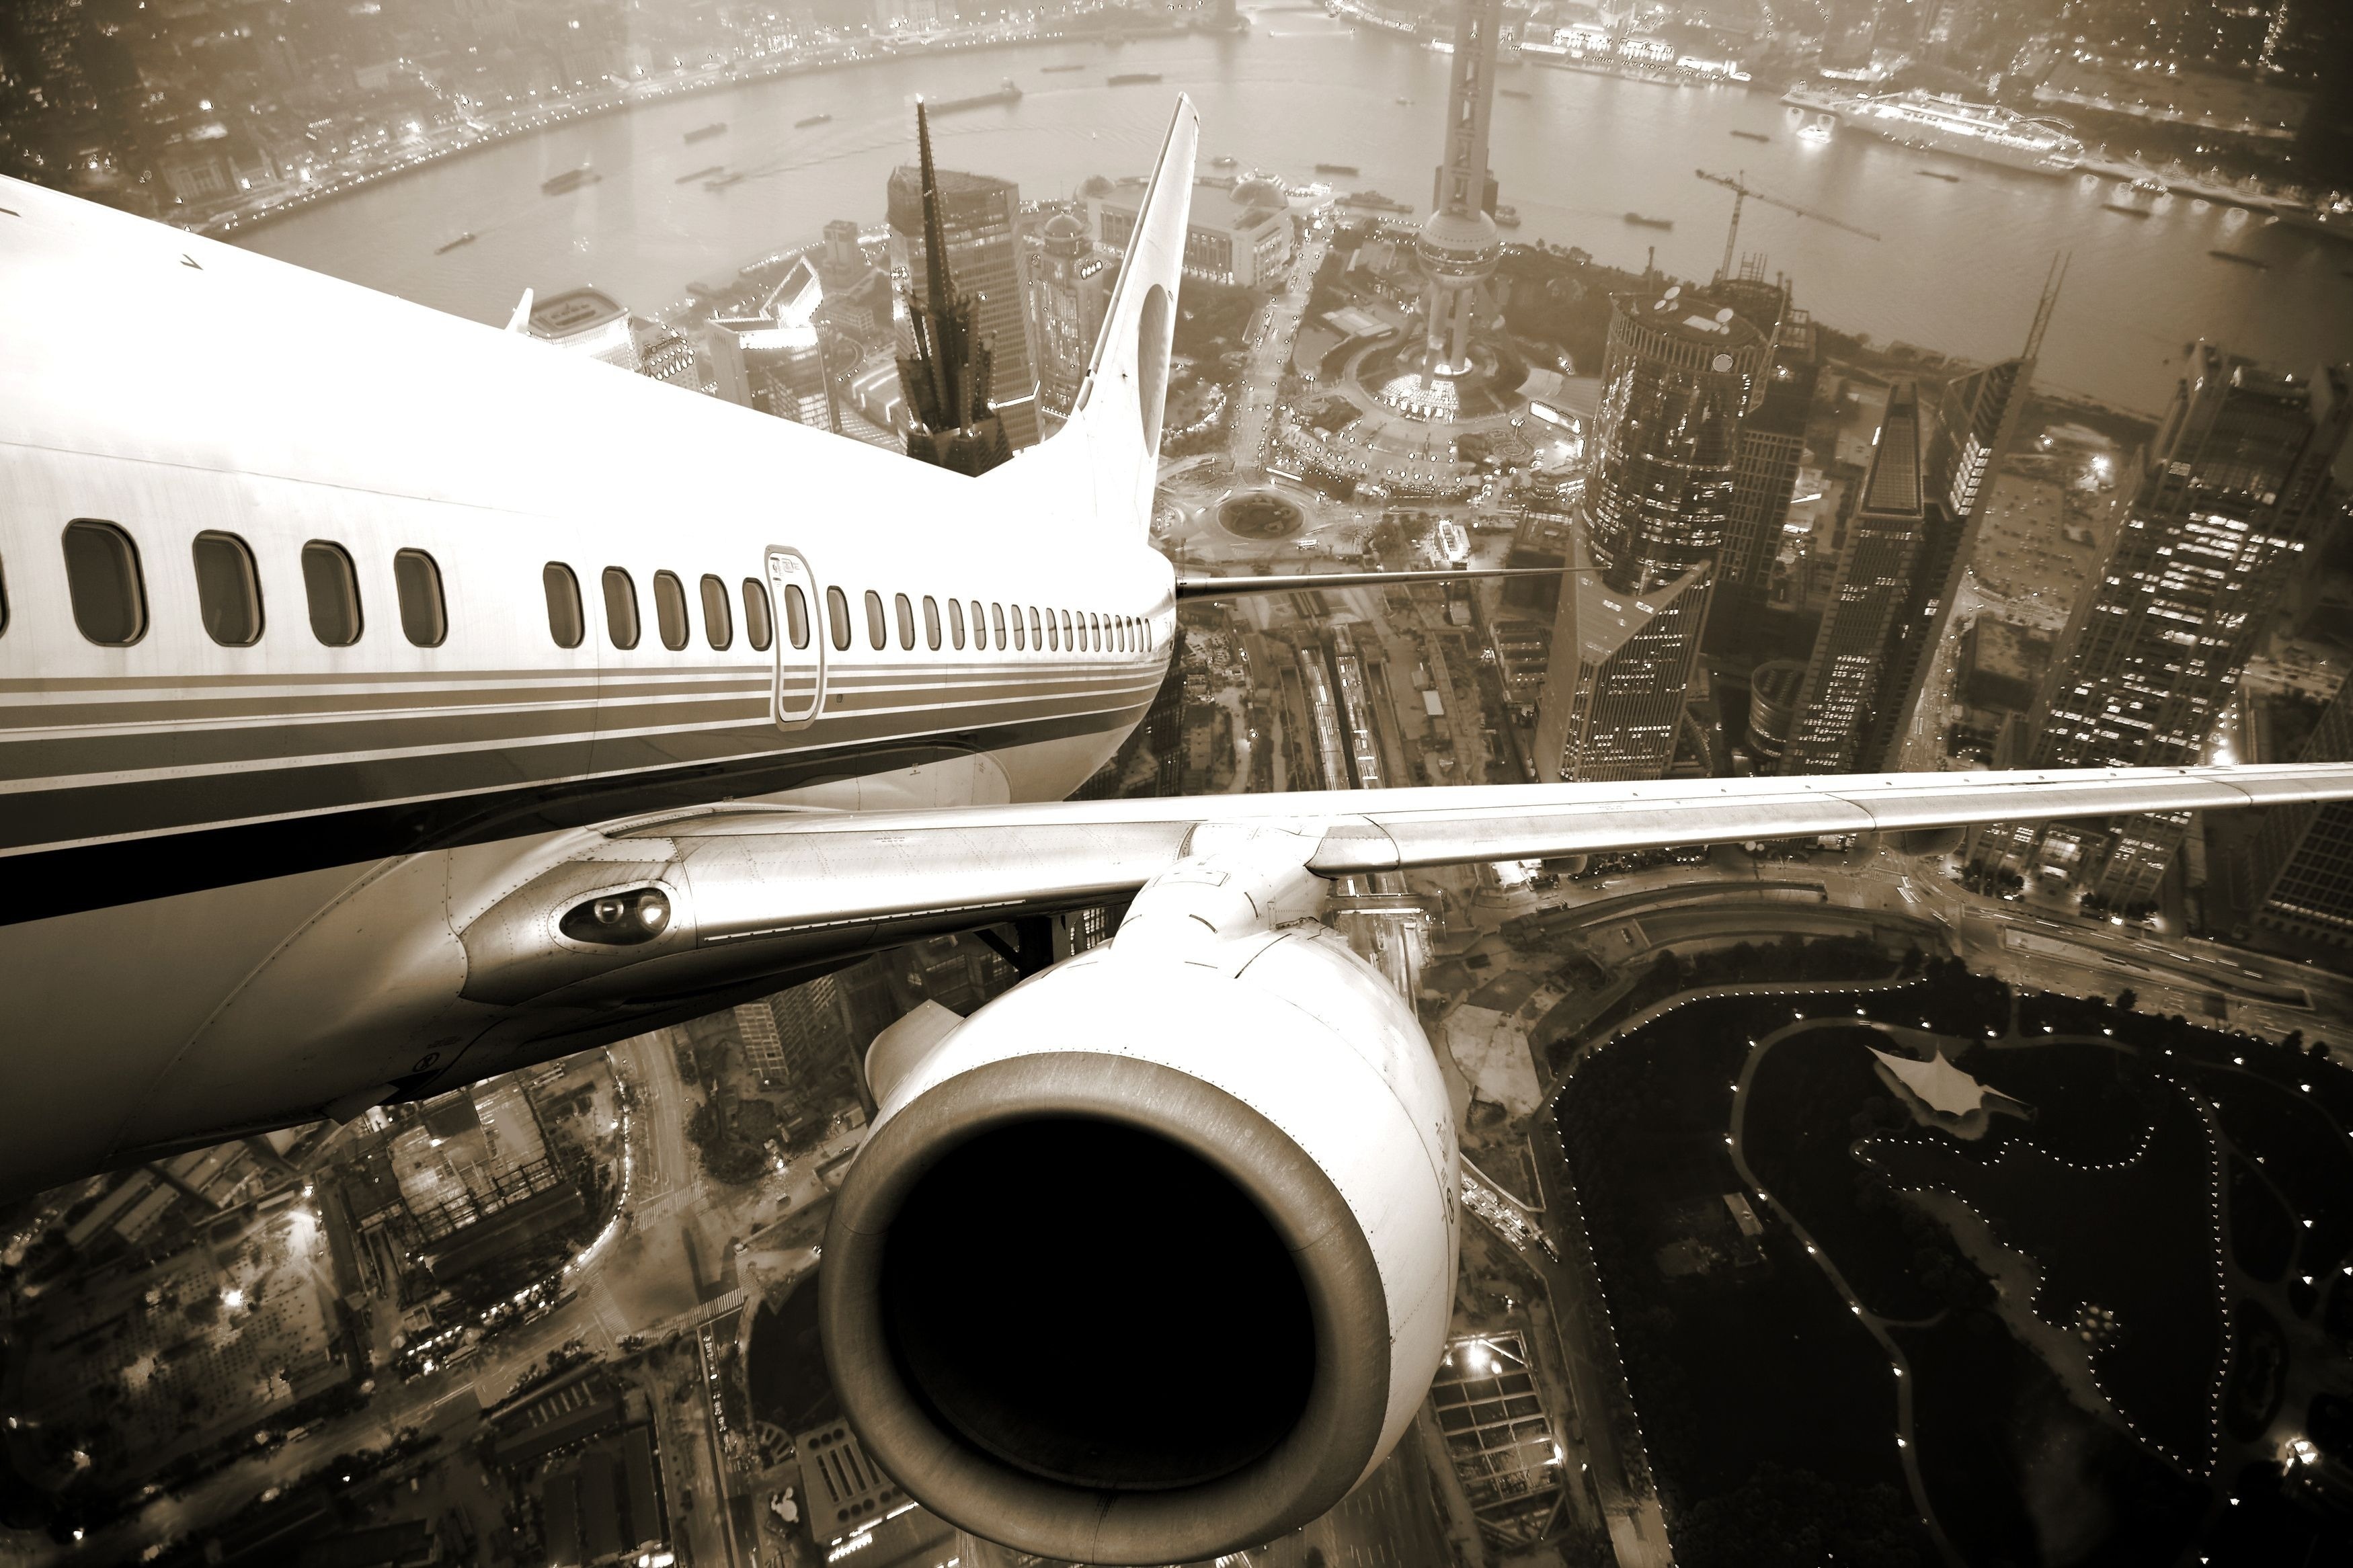 Wallpaper. Aviation. photo. picture. the plane, the rise, engine, the city, Shanghai